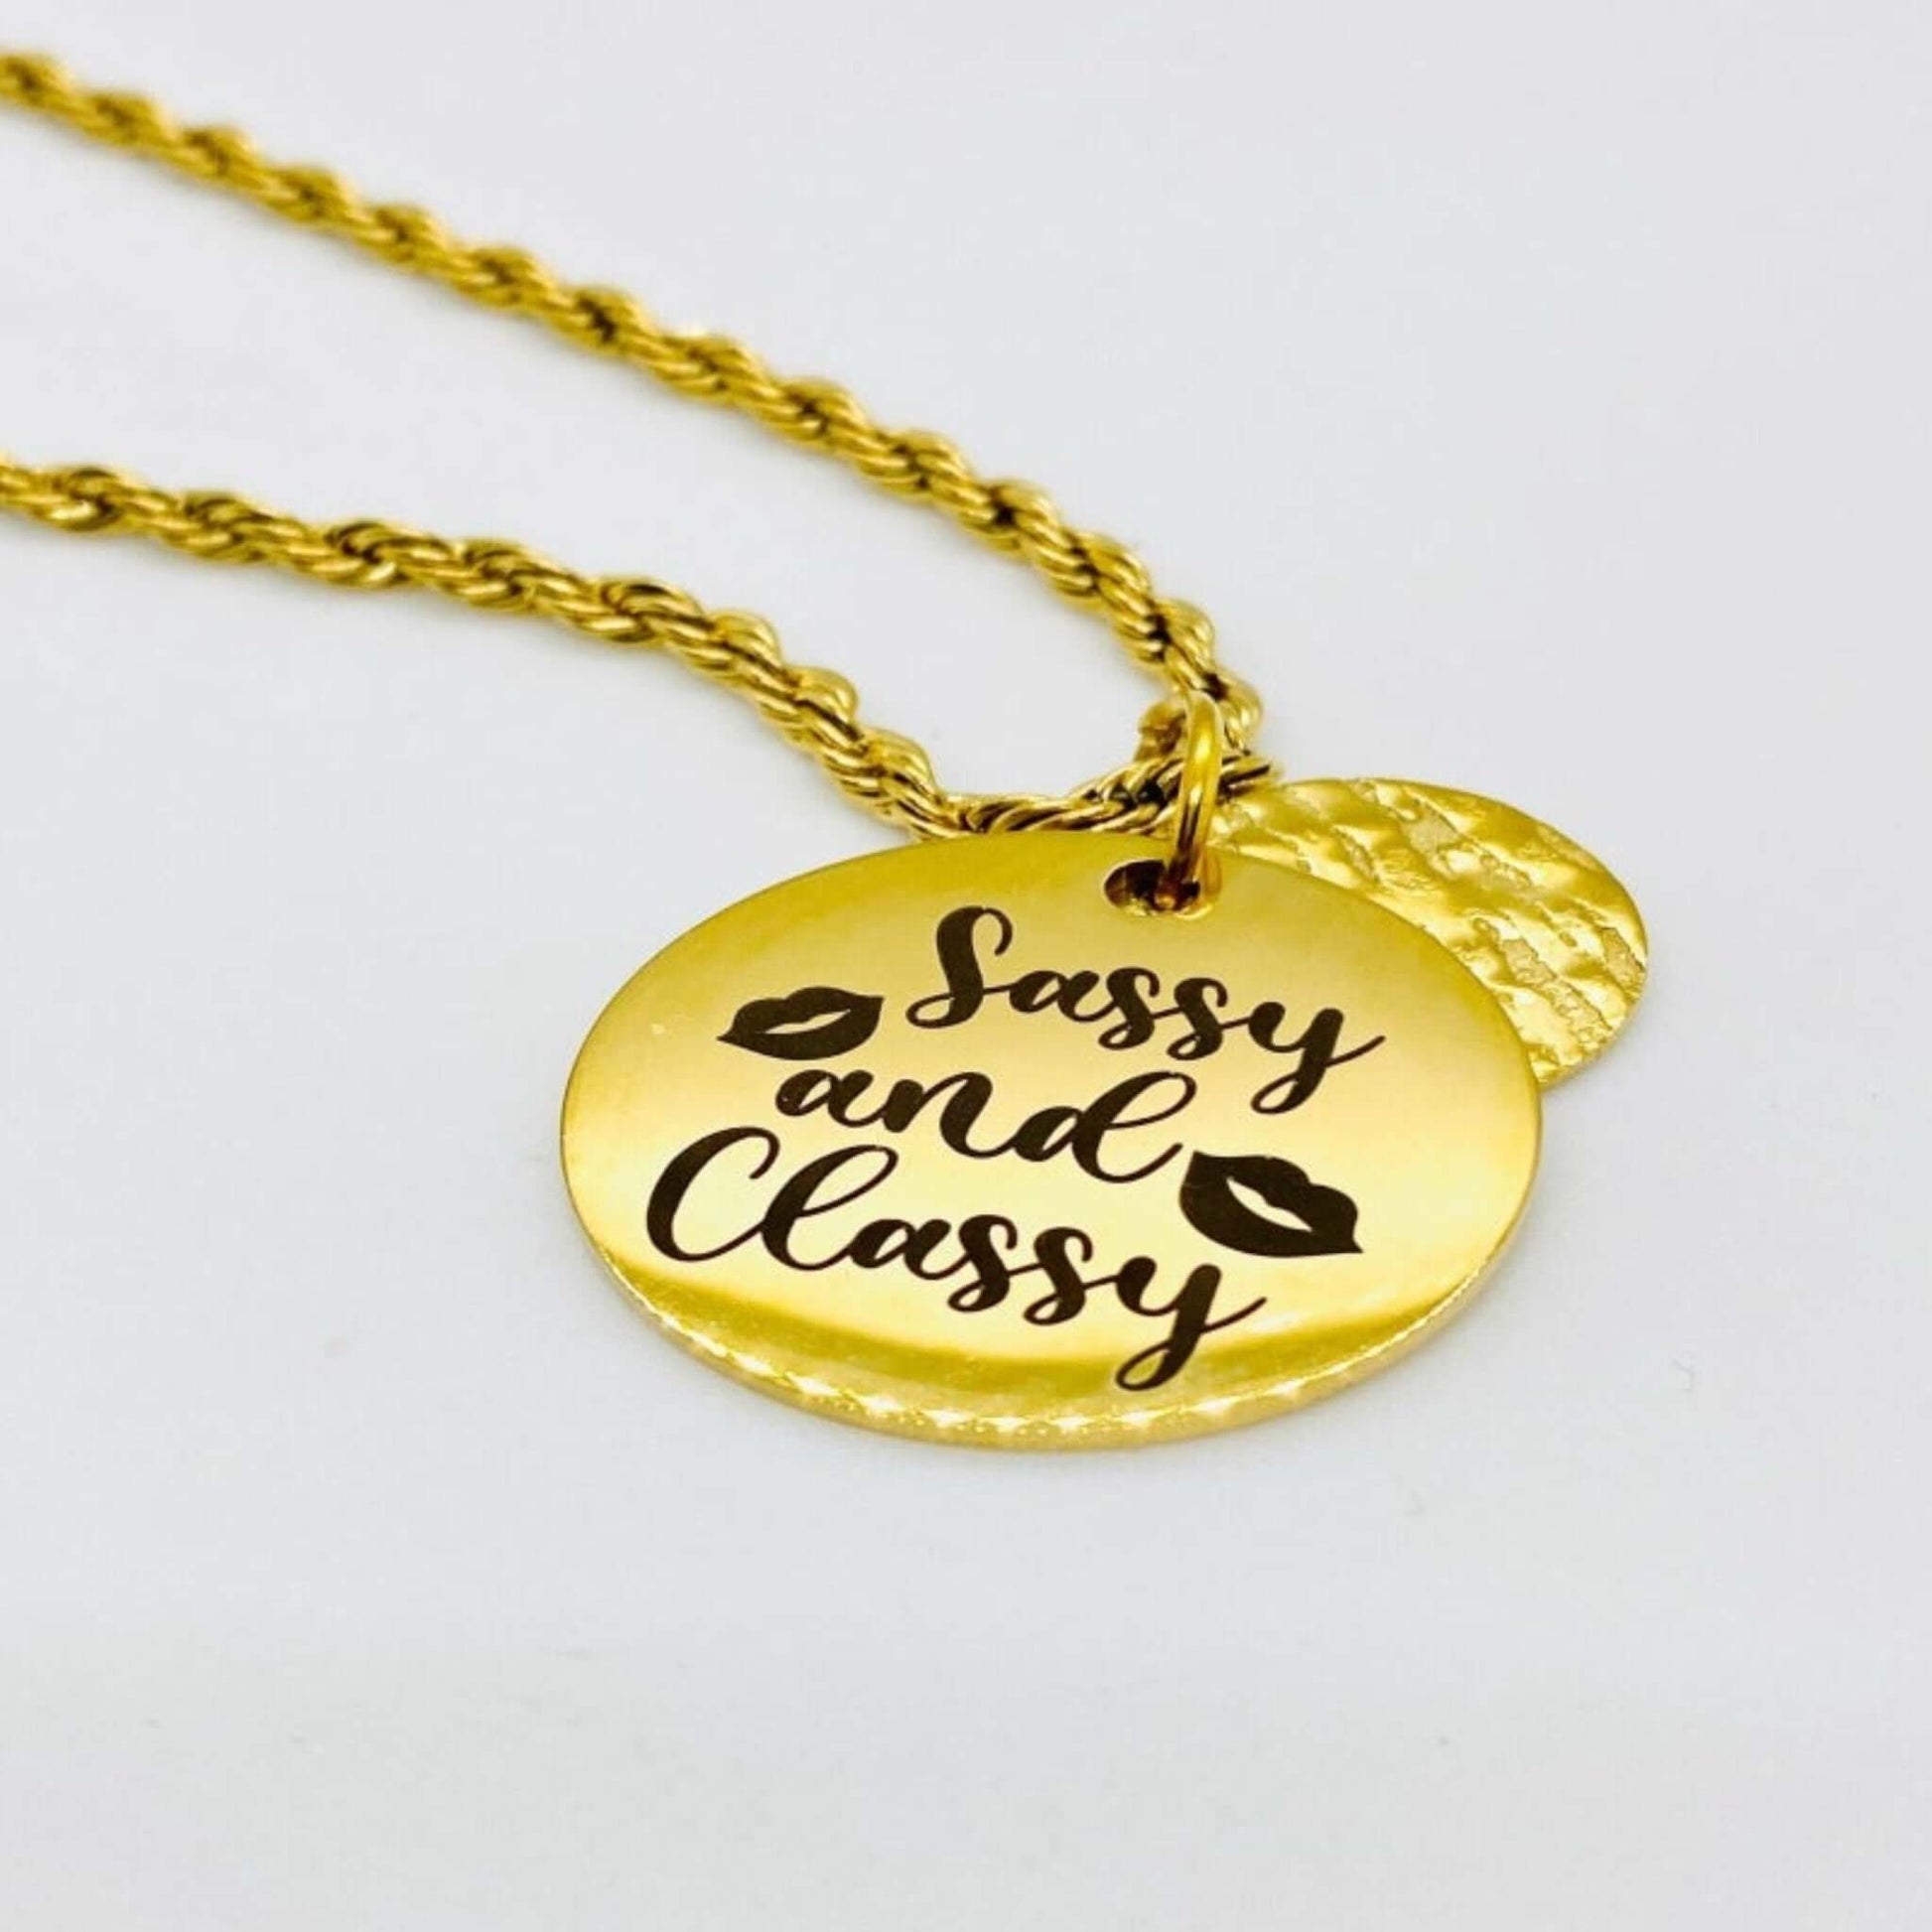 Stainless Steel Classy and Sassy Necklace